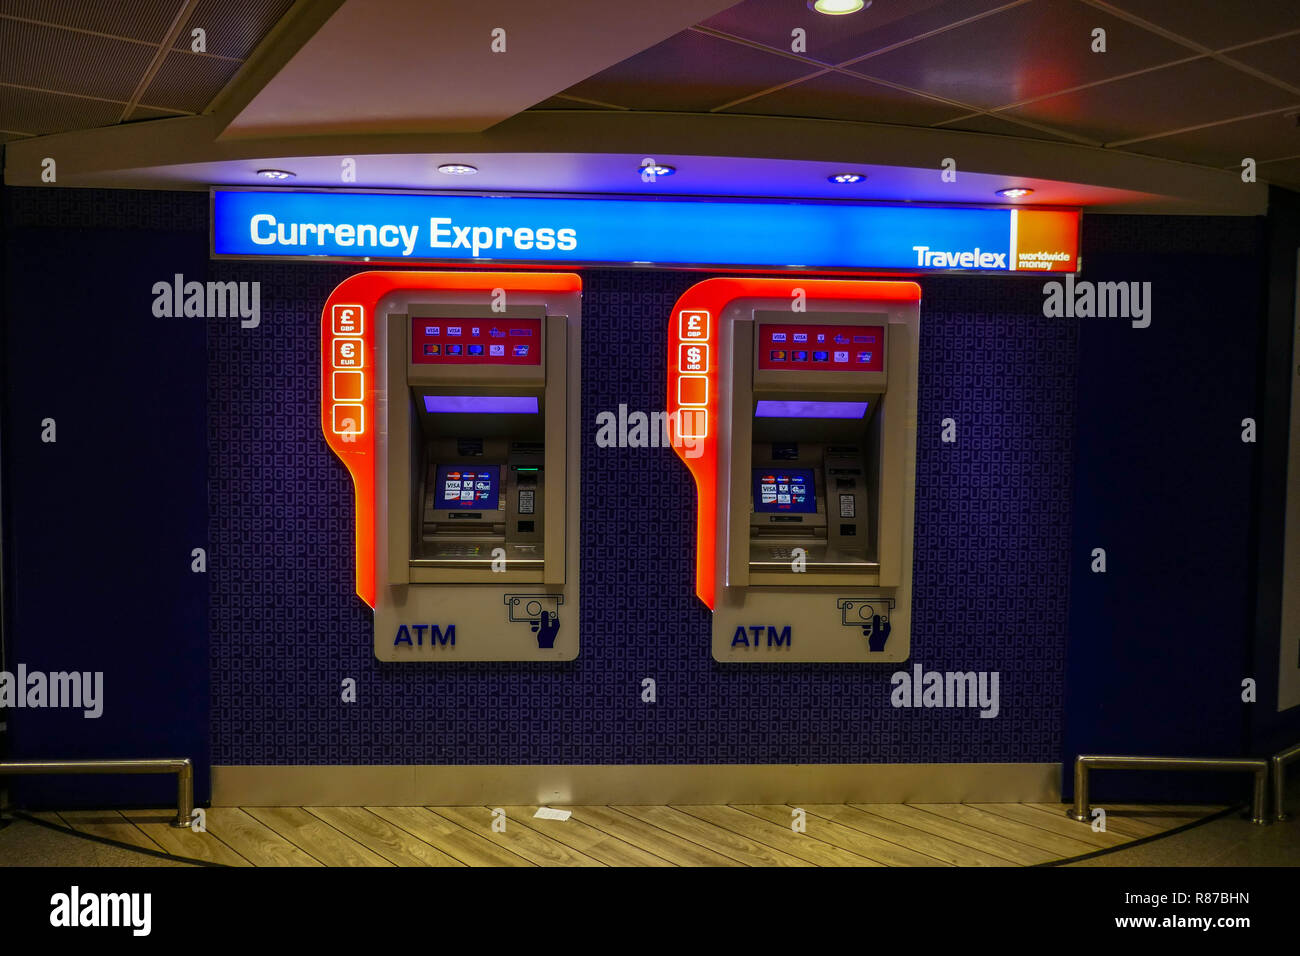 Travelex Currency Express ATM cash machines at Manchester Airport, Manchester, England, UK Stock Photo